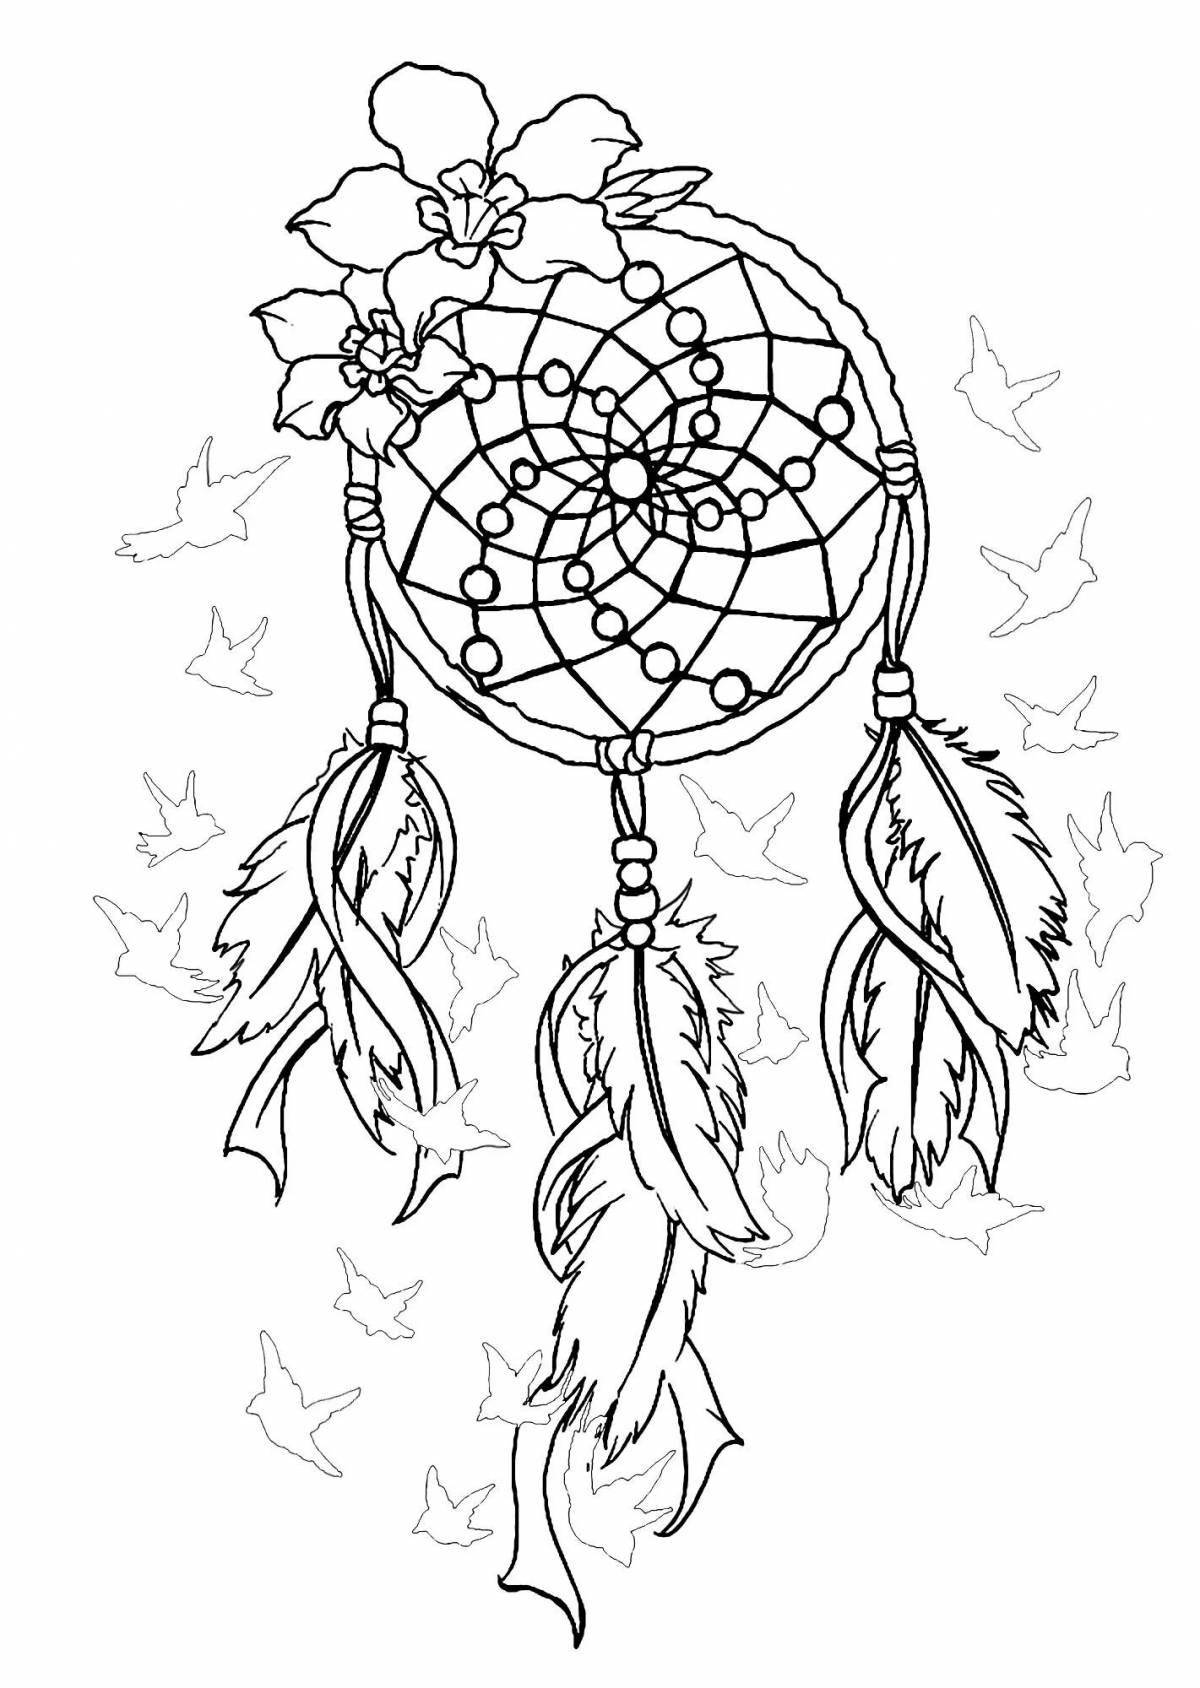 Animating coloring book antistress dream catcher